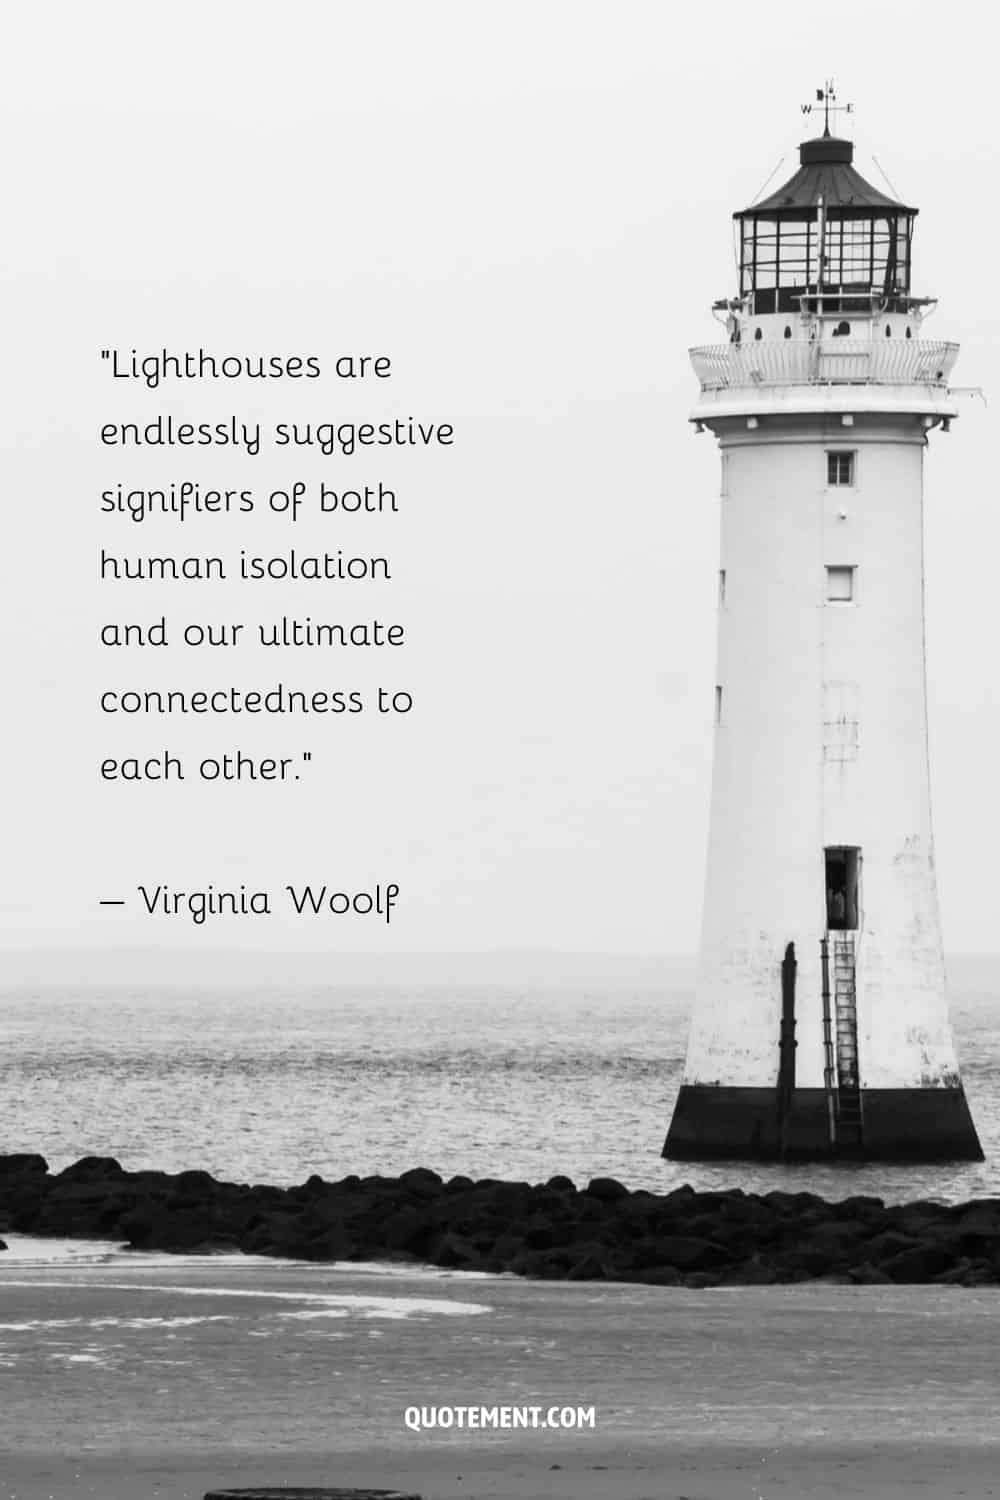 Deep quote on lighthouses by Virginia Woolf and a lighthouse in black and white